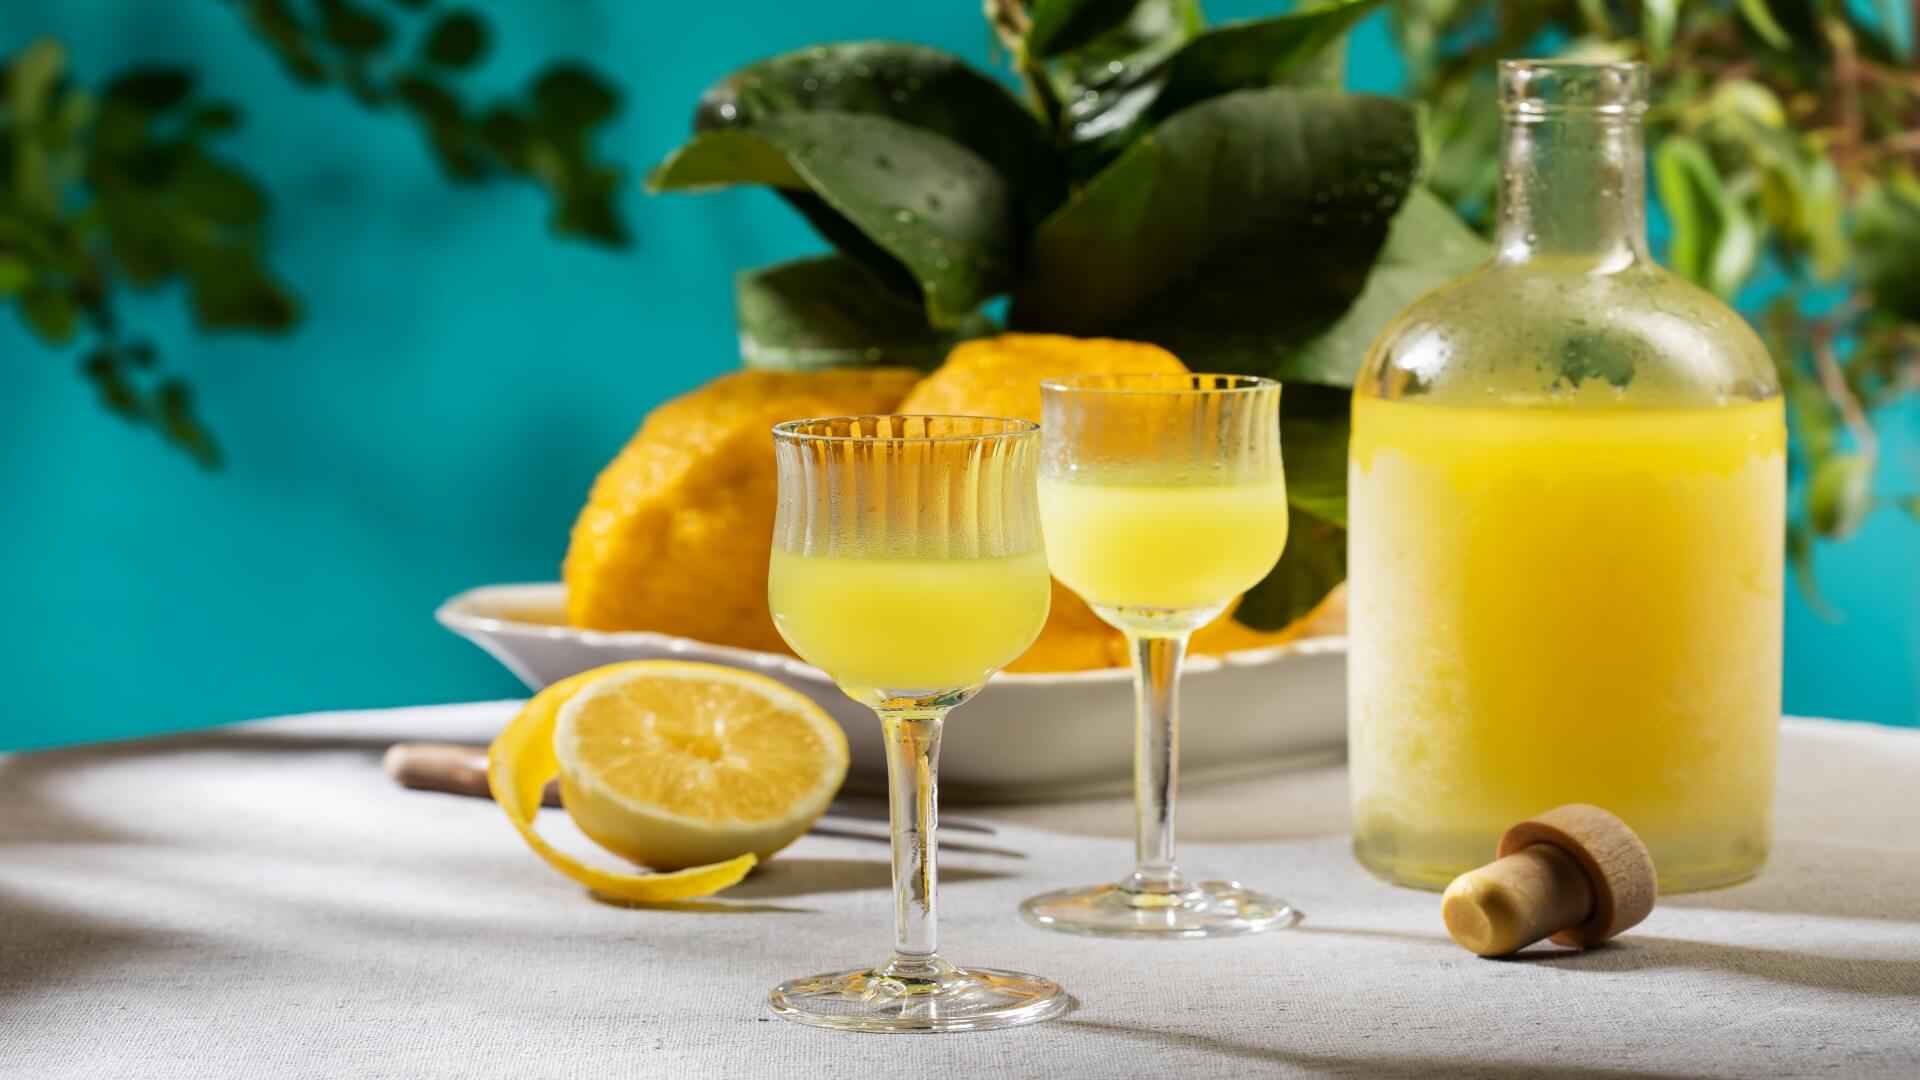 Make your own Limoncello for a tart sip of Italian sunshine